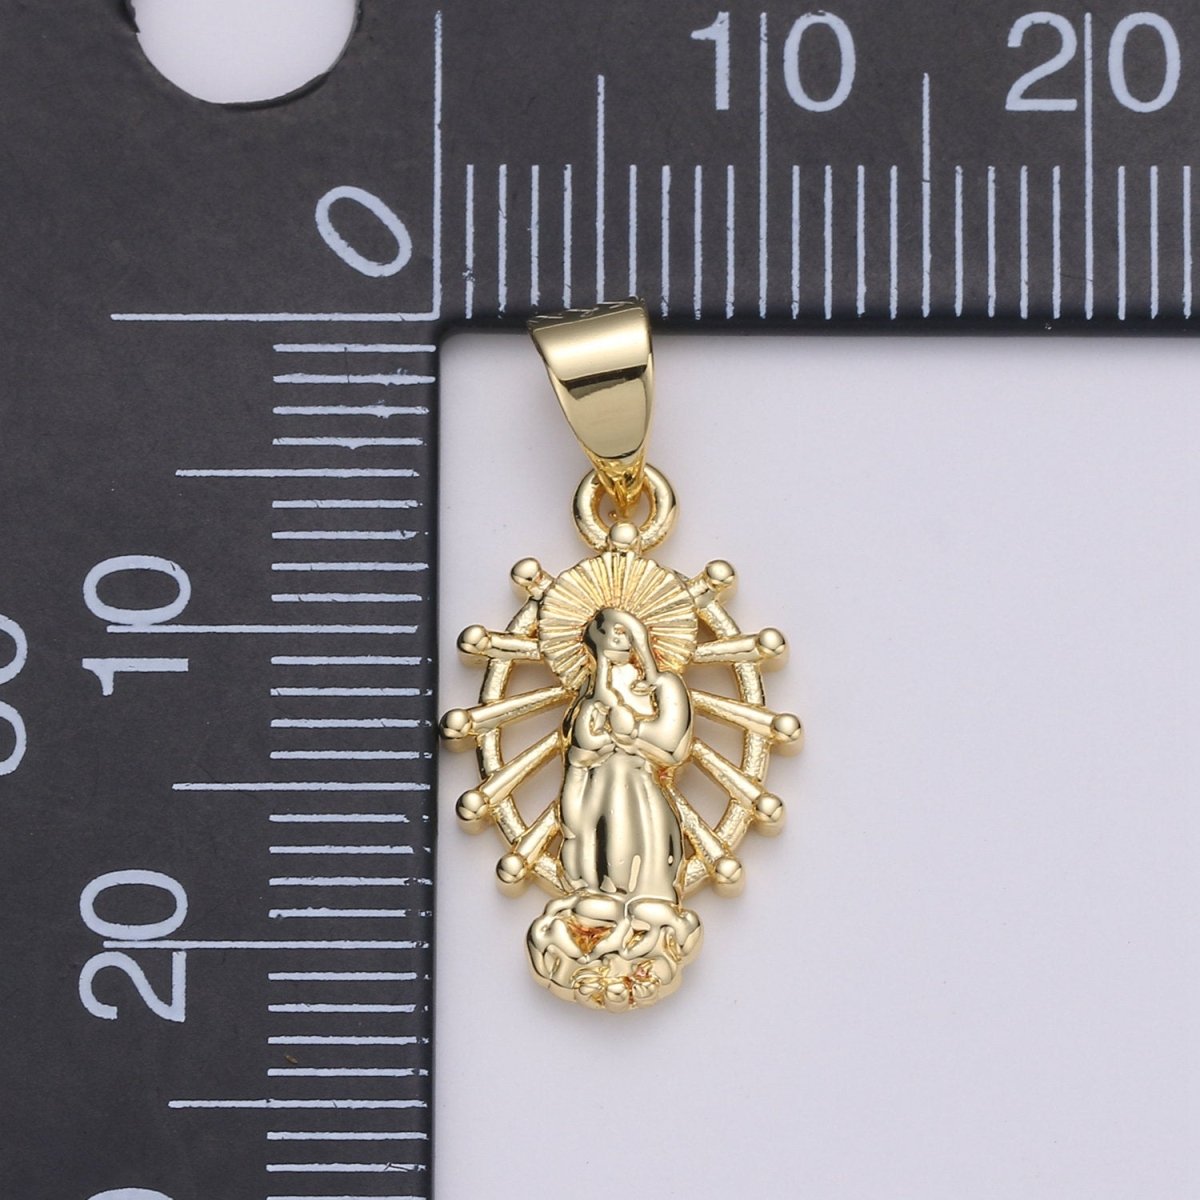 Dainty Charm 24k Gold Filled Virgin Mary Pendant, Lady Guadalupe Oval Charm, Mother of Jesus Medallion Pendant Necklace I-914 - DLUXCA